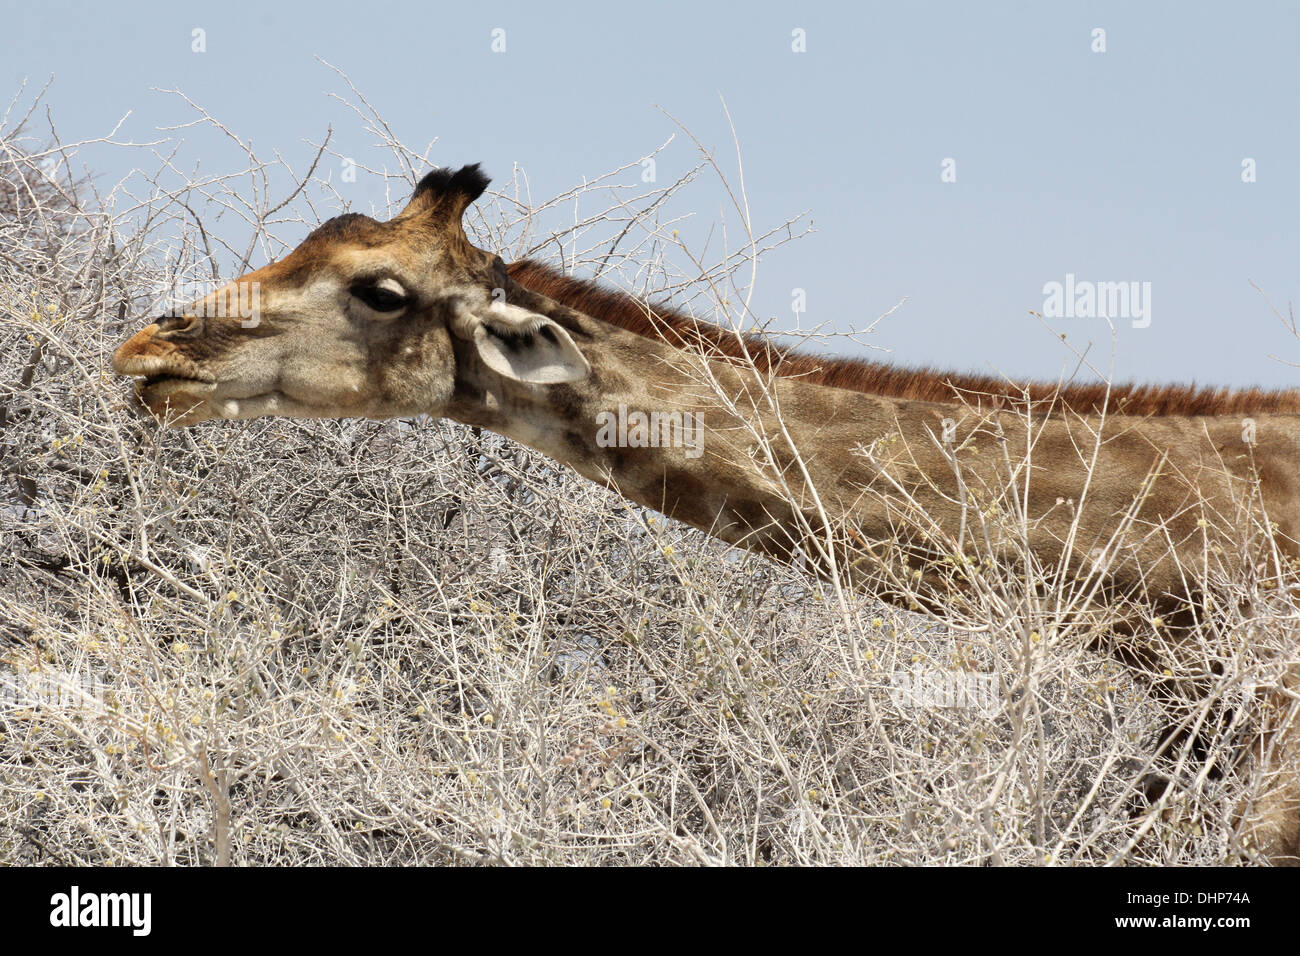 Reticulated giraffe stretching it's long neck to feed of bushes,Namibian Desert,Namibia,Africa. Stock Photo